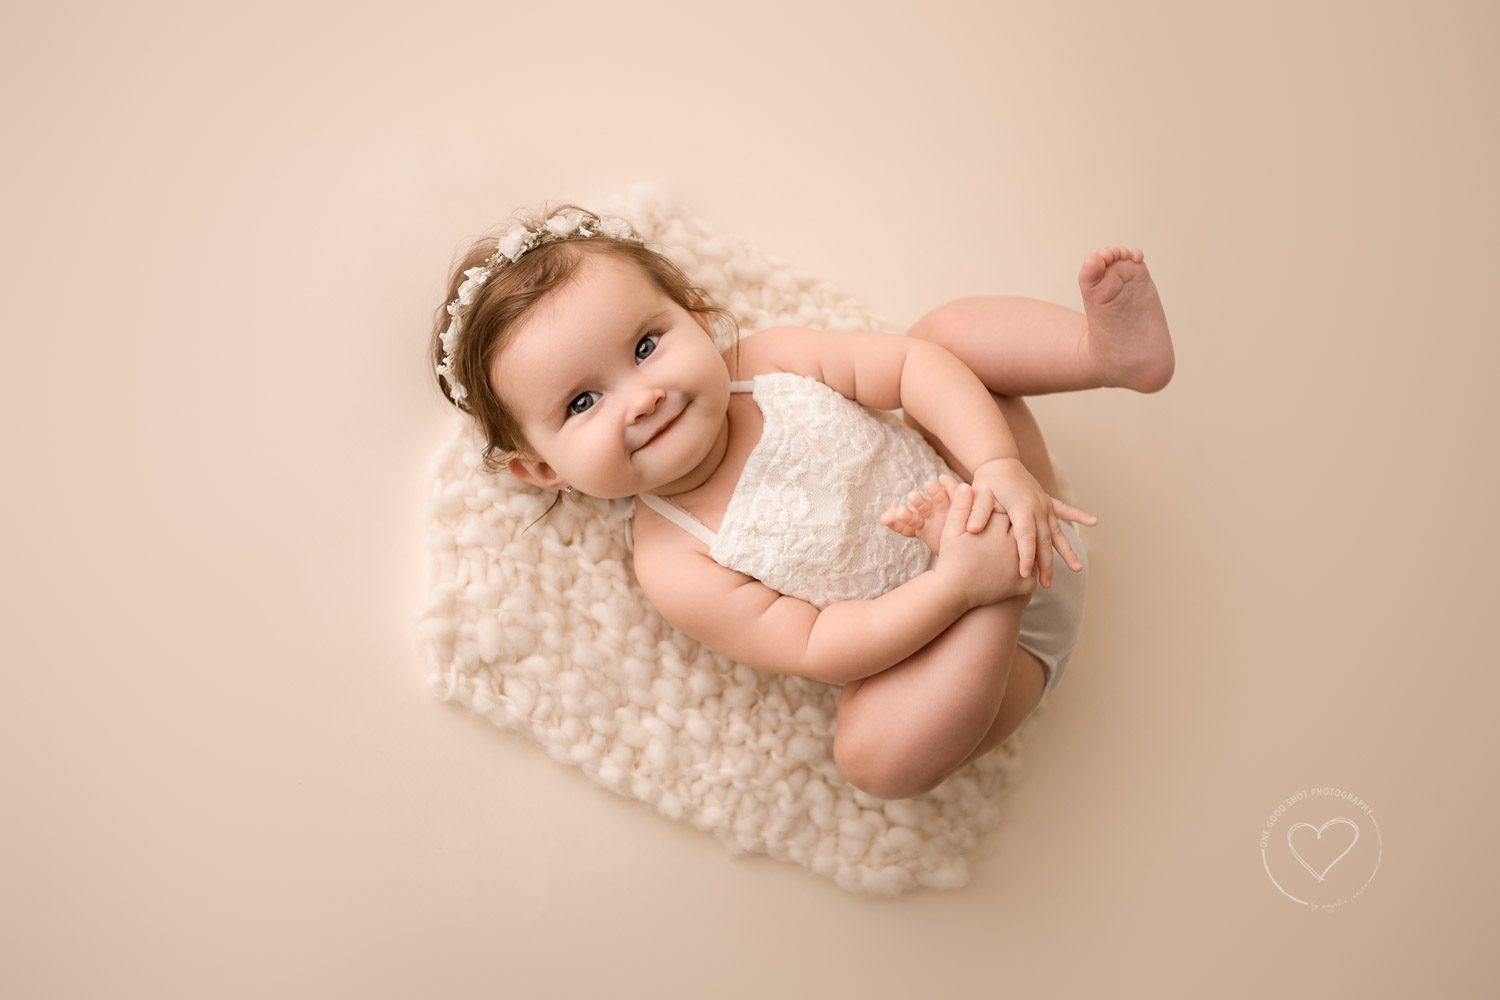 baby girl milestone photos, 6 months old, laying down, looking up at camera grabbing feet, white romper, floral halo, fresno, clovis, photographer 